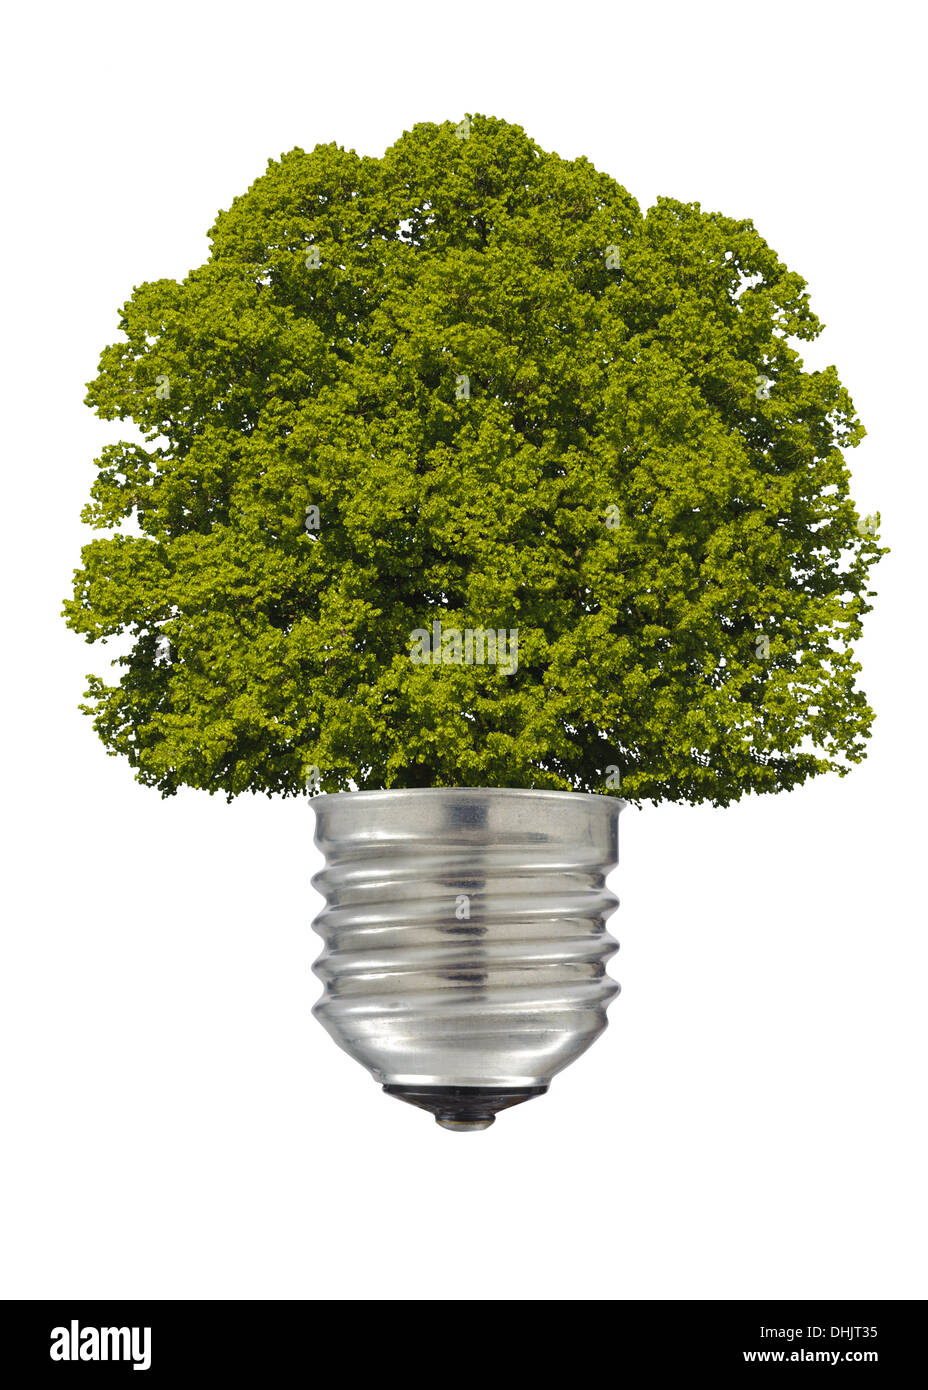 tree and electric lamp as symbol Stock Photo